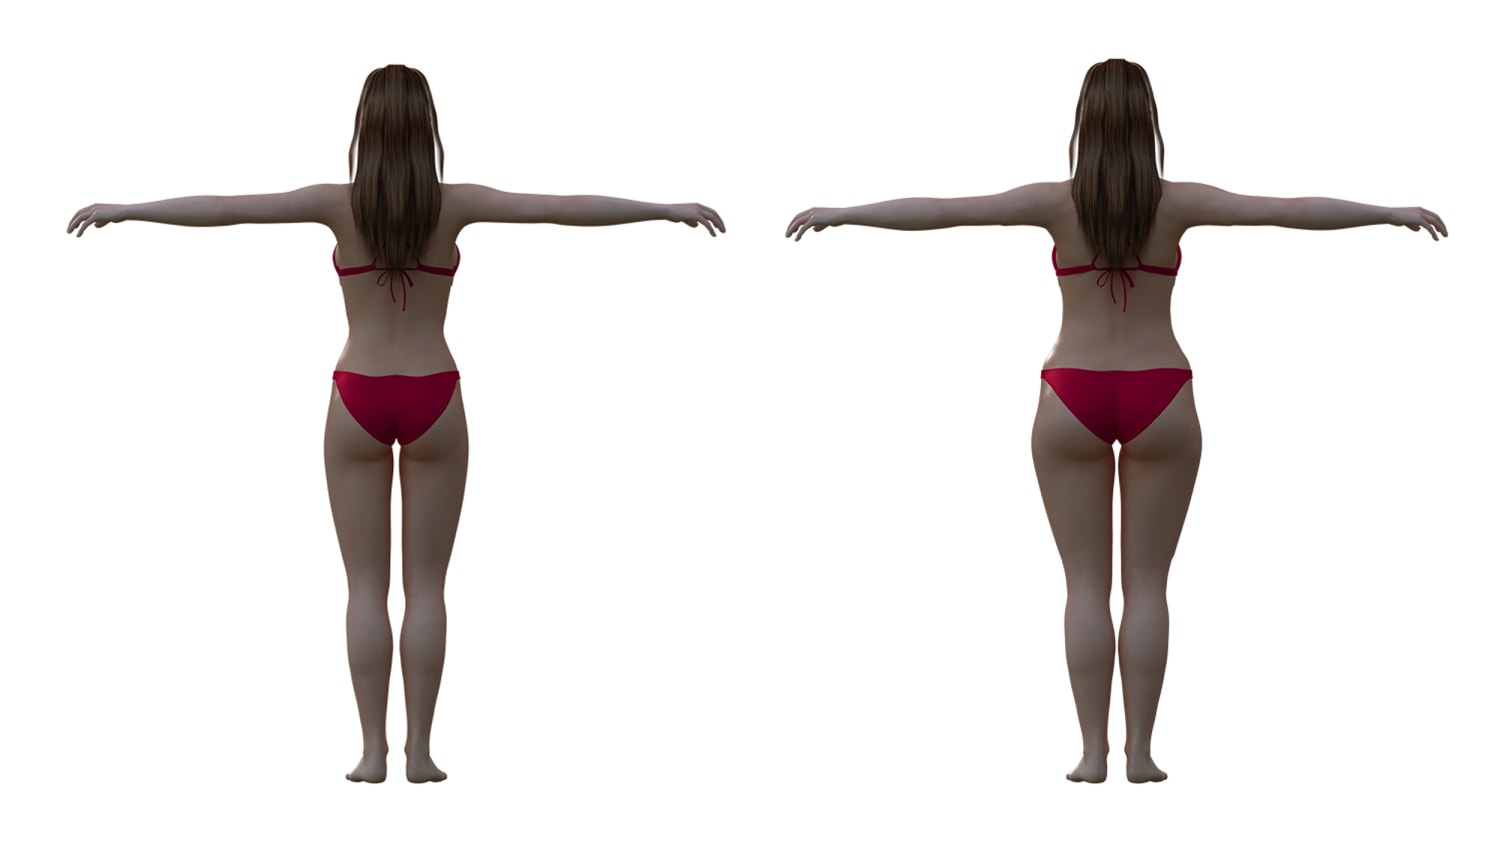 From a male perspective, what is the ideal body weight for a female? - Quora